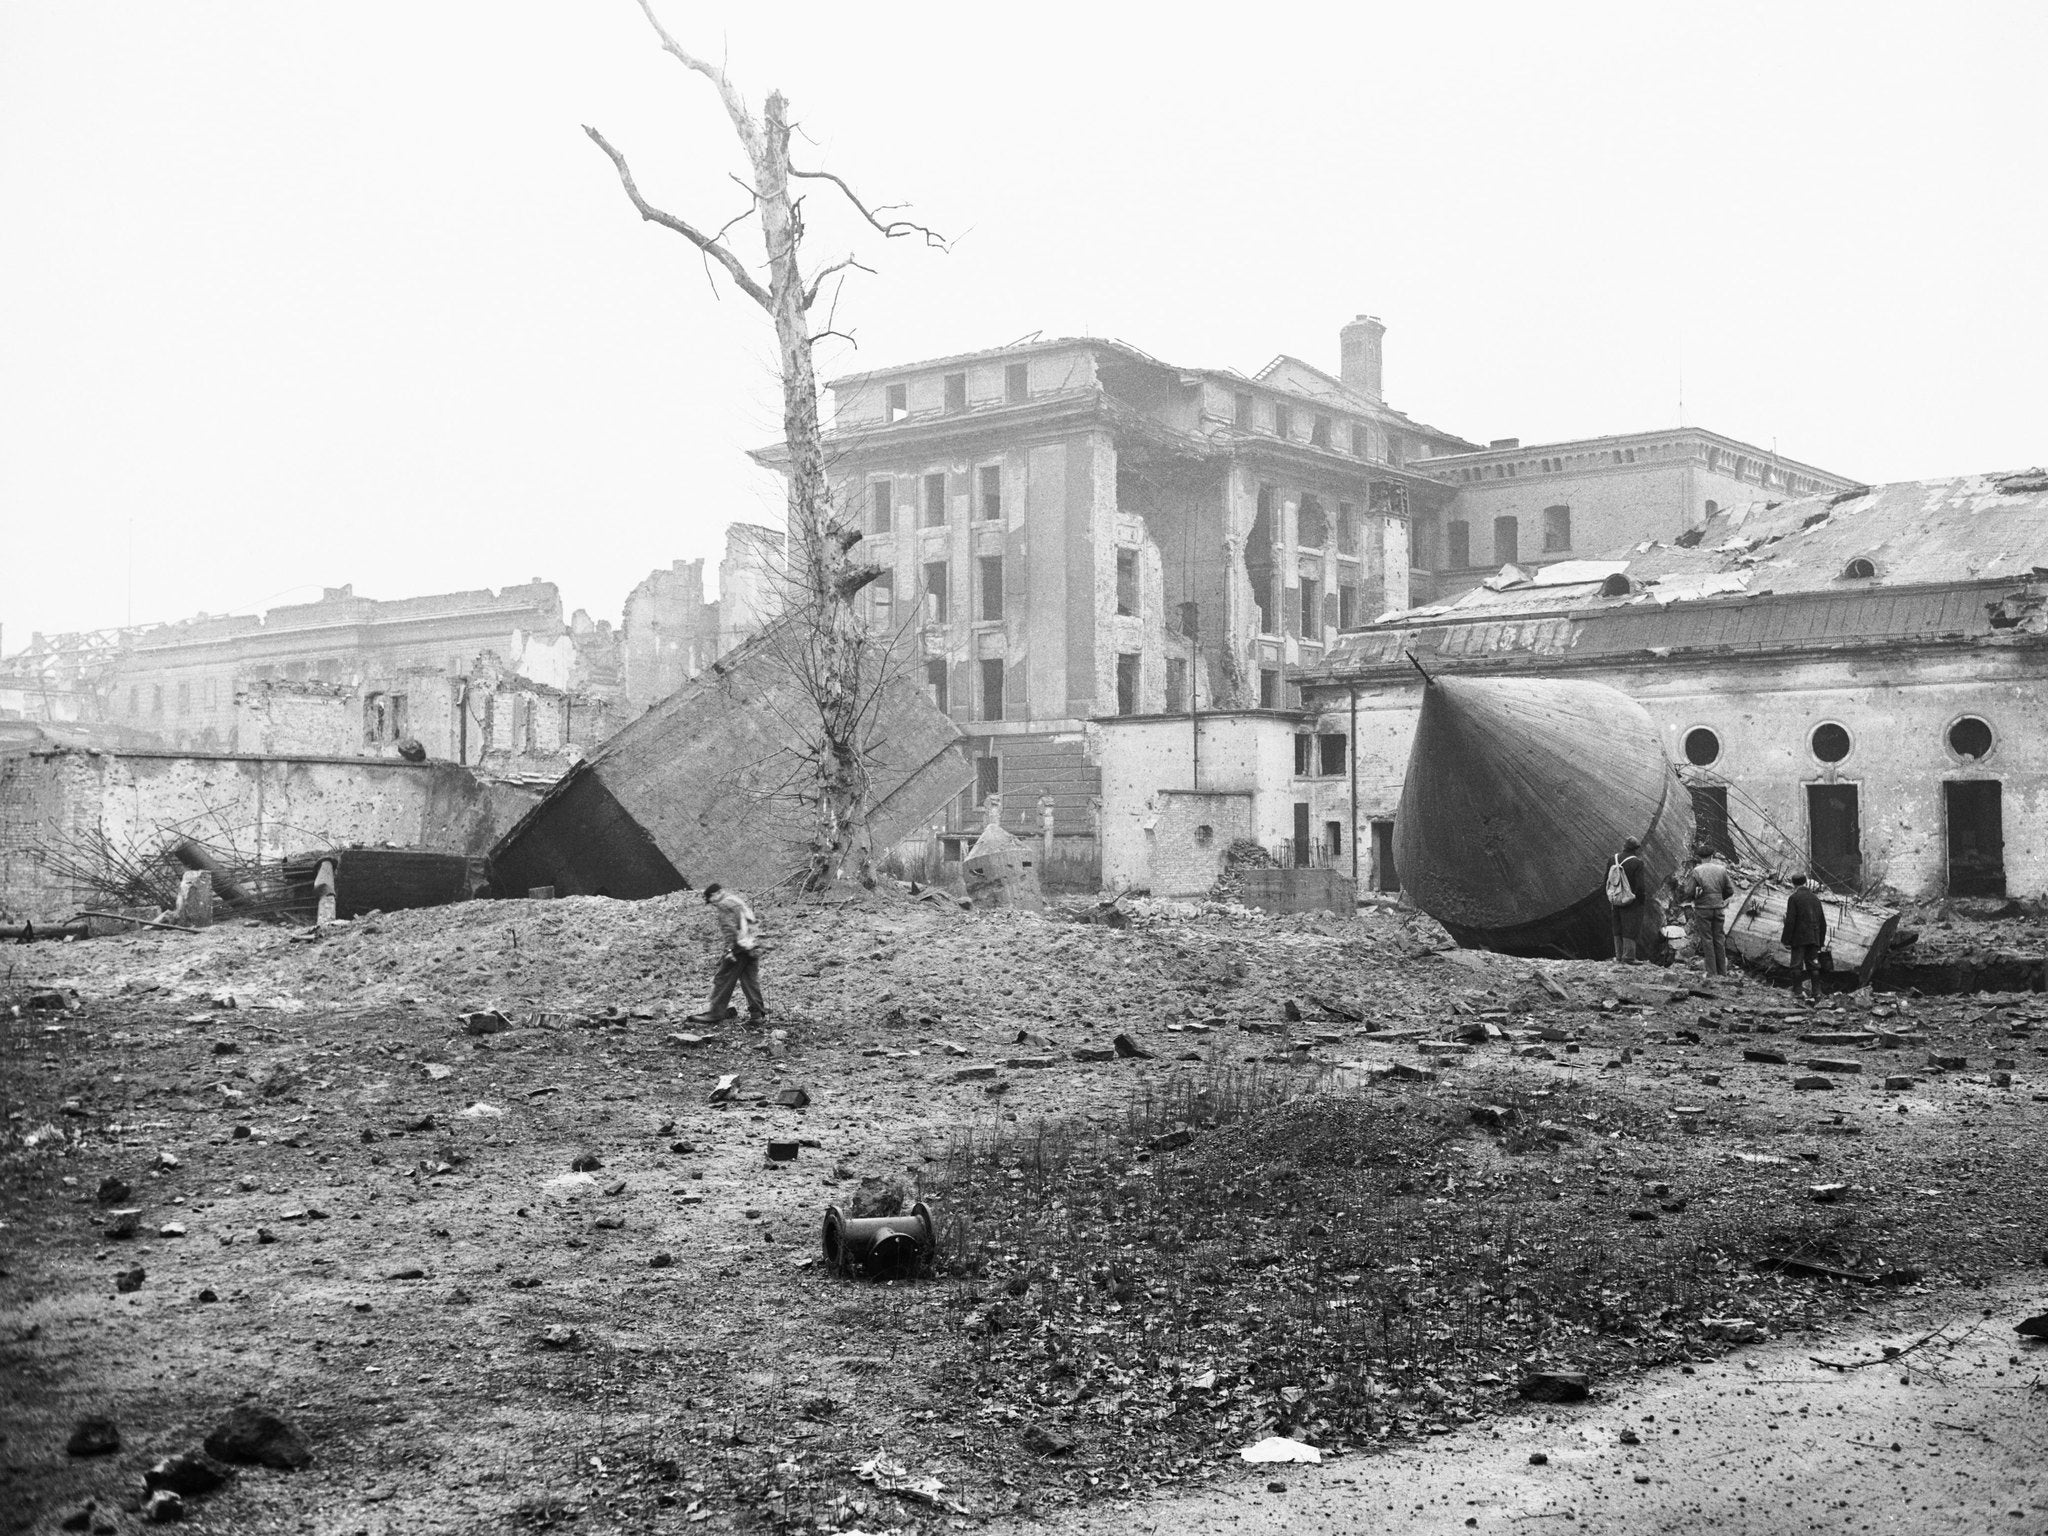 Russians Blow up Hitler's "Tombstone." Berlin, Germany: Sightseers walk amid the ruins of Hitler's air raid shelter, sometimes referred to as Hitler's "tombstone".